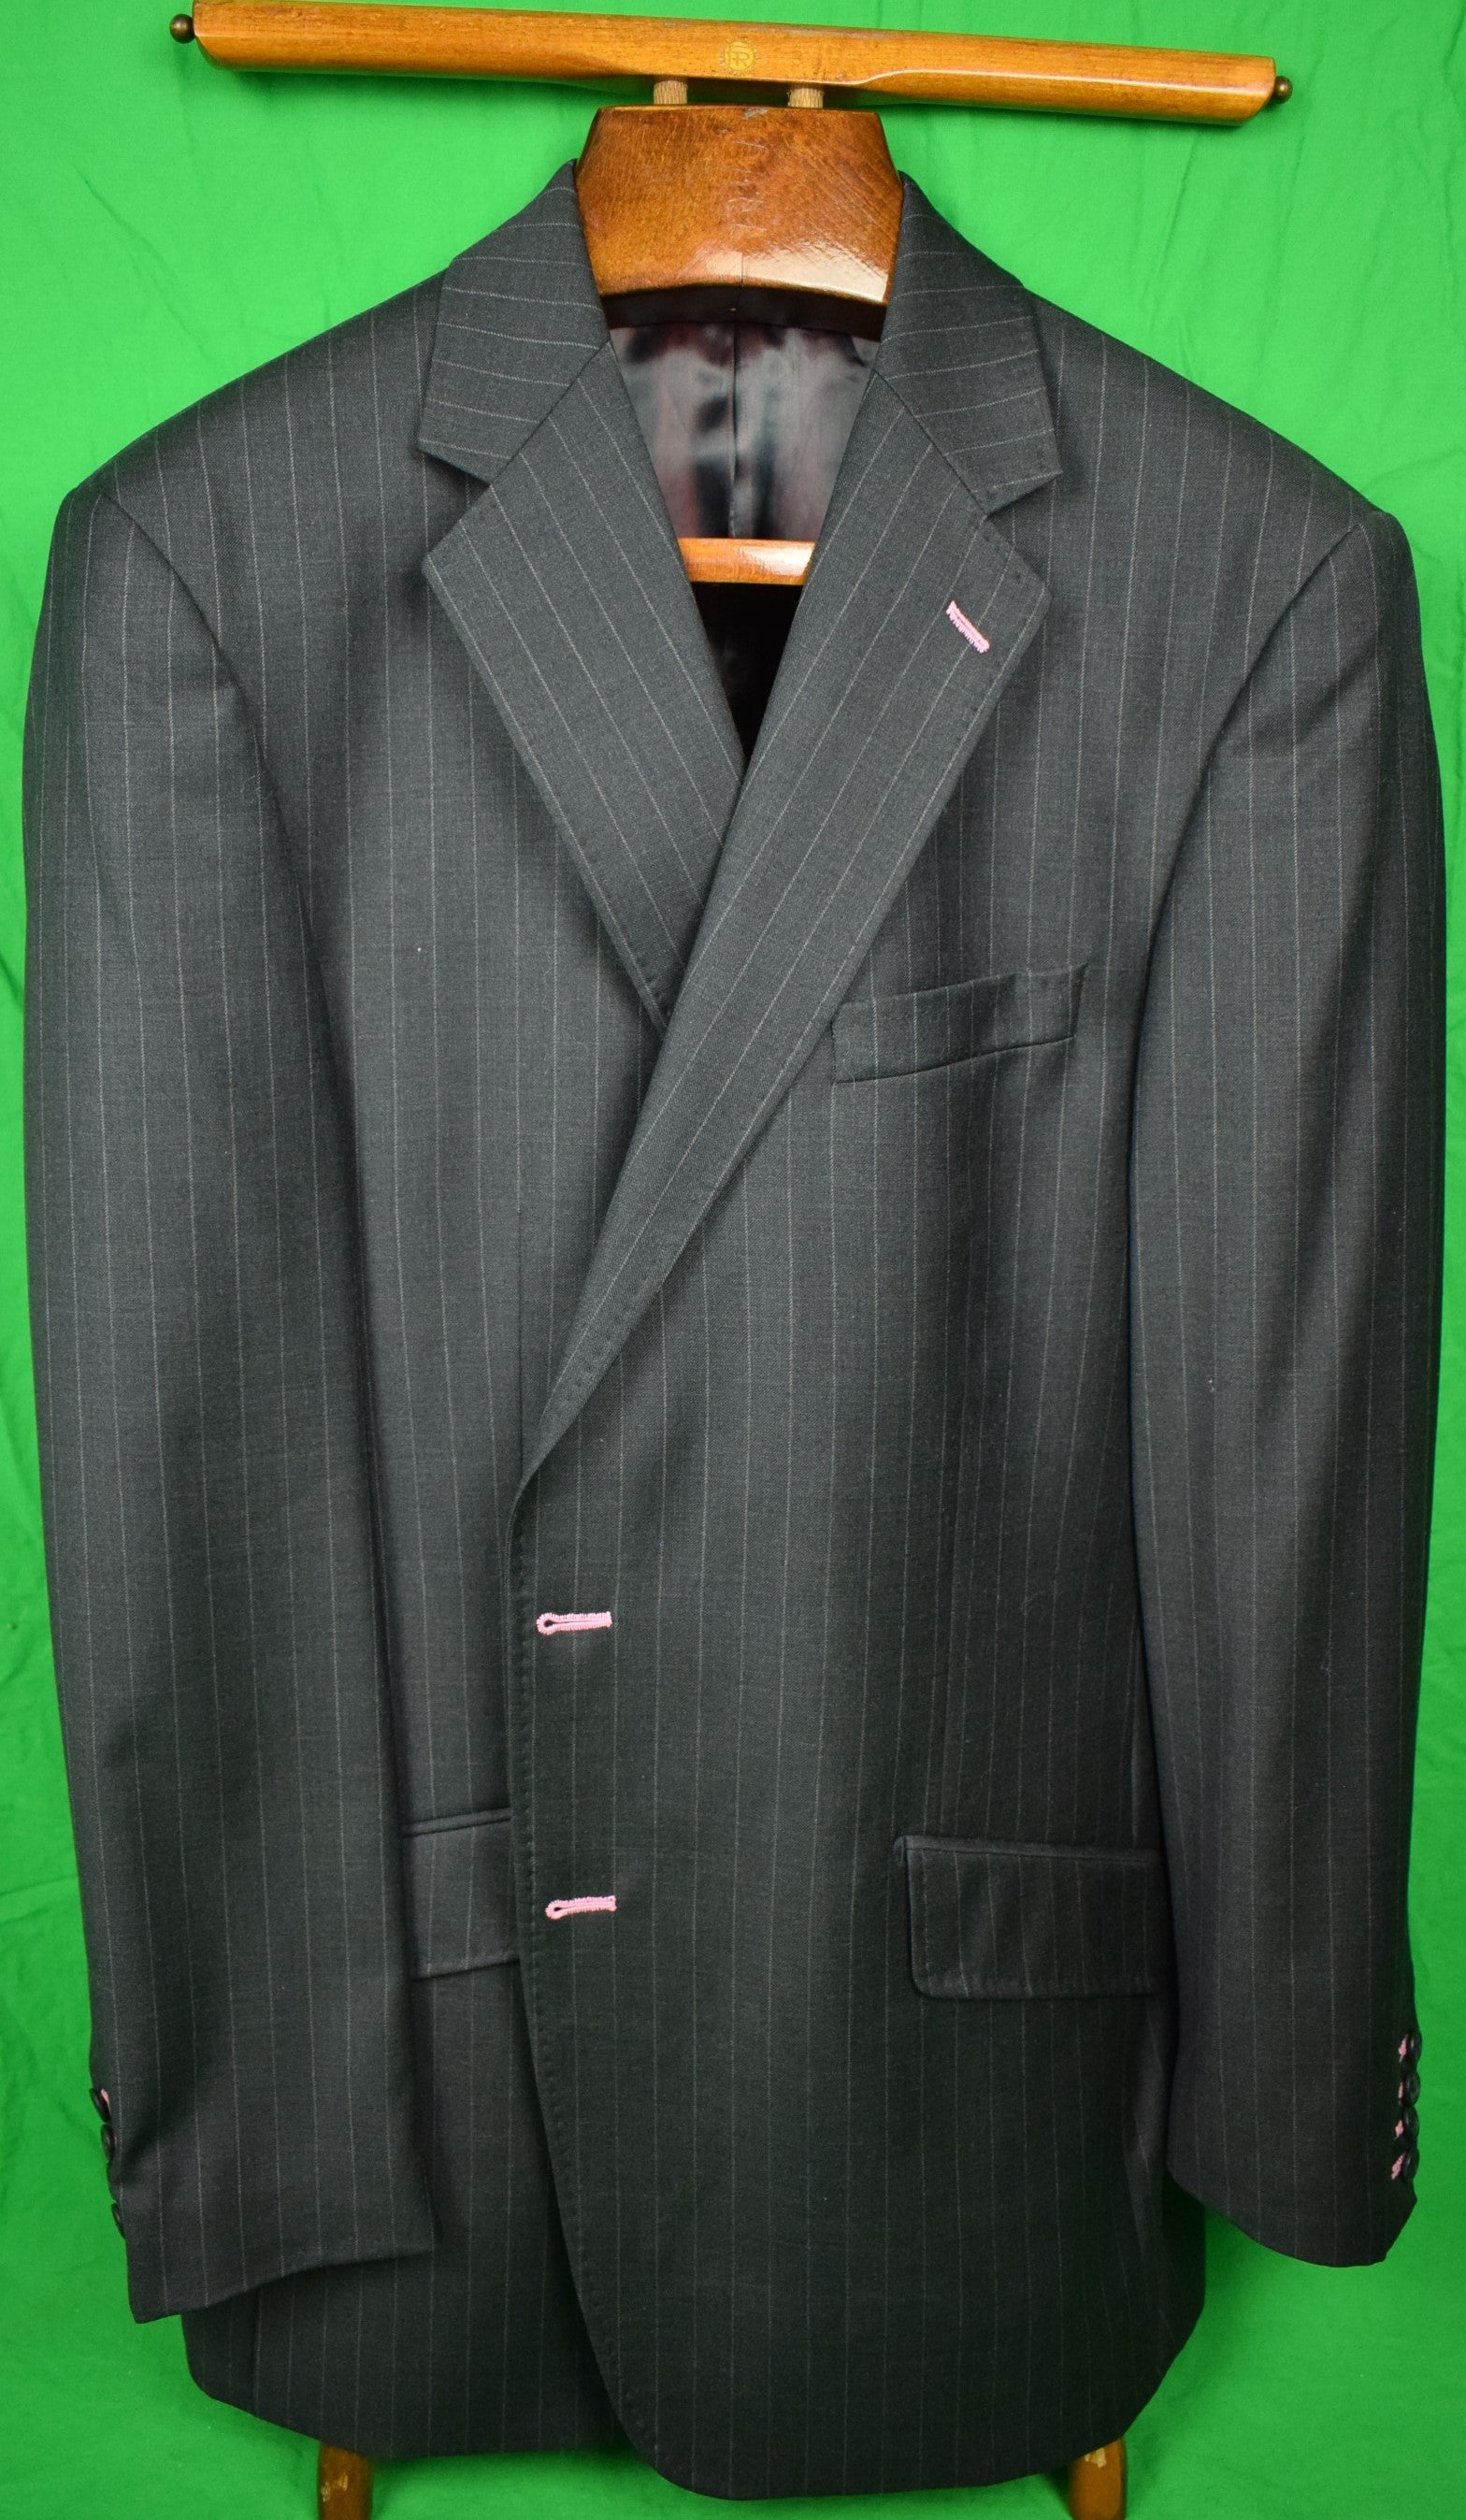 Clothing - Suitings